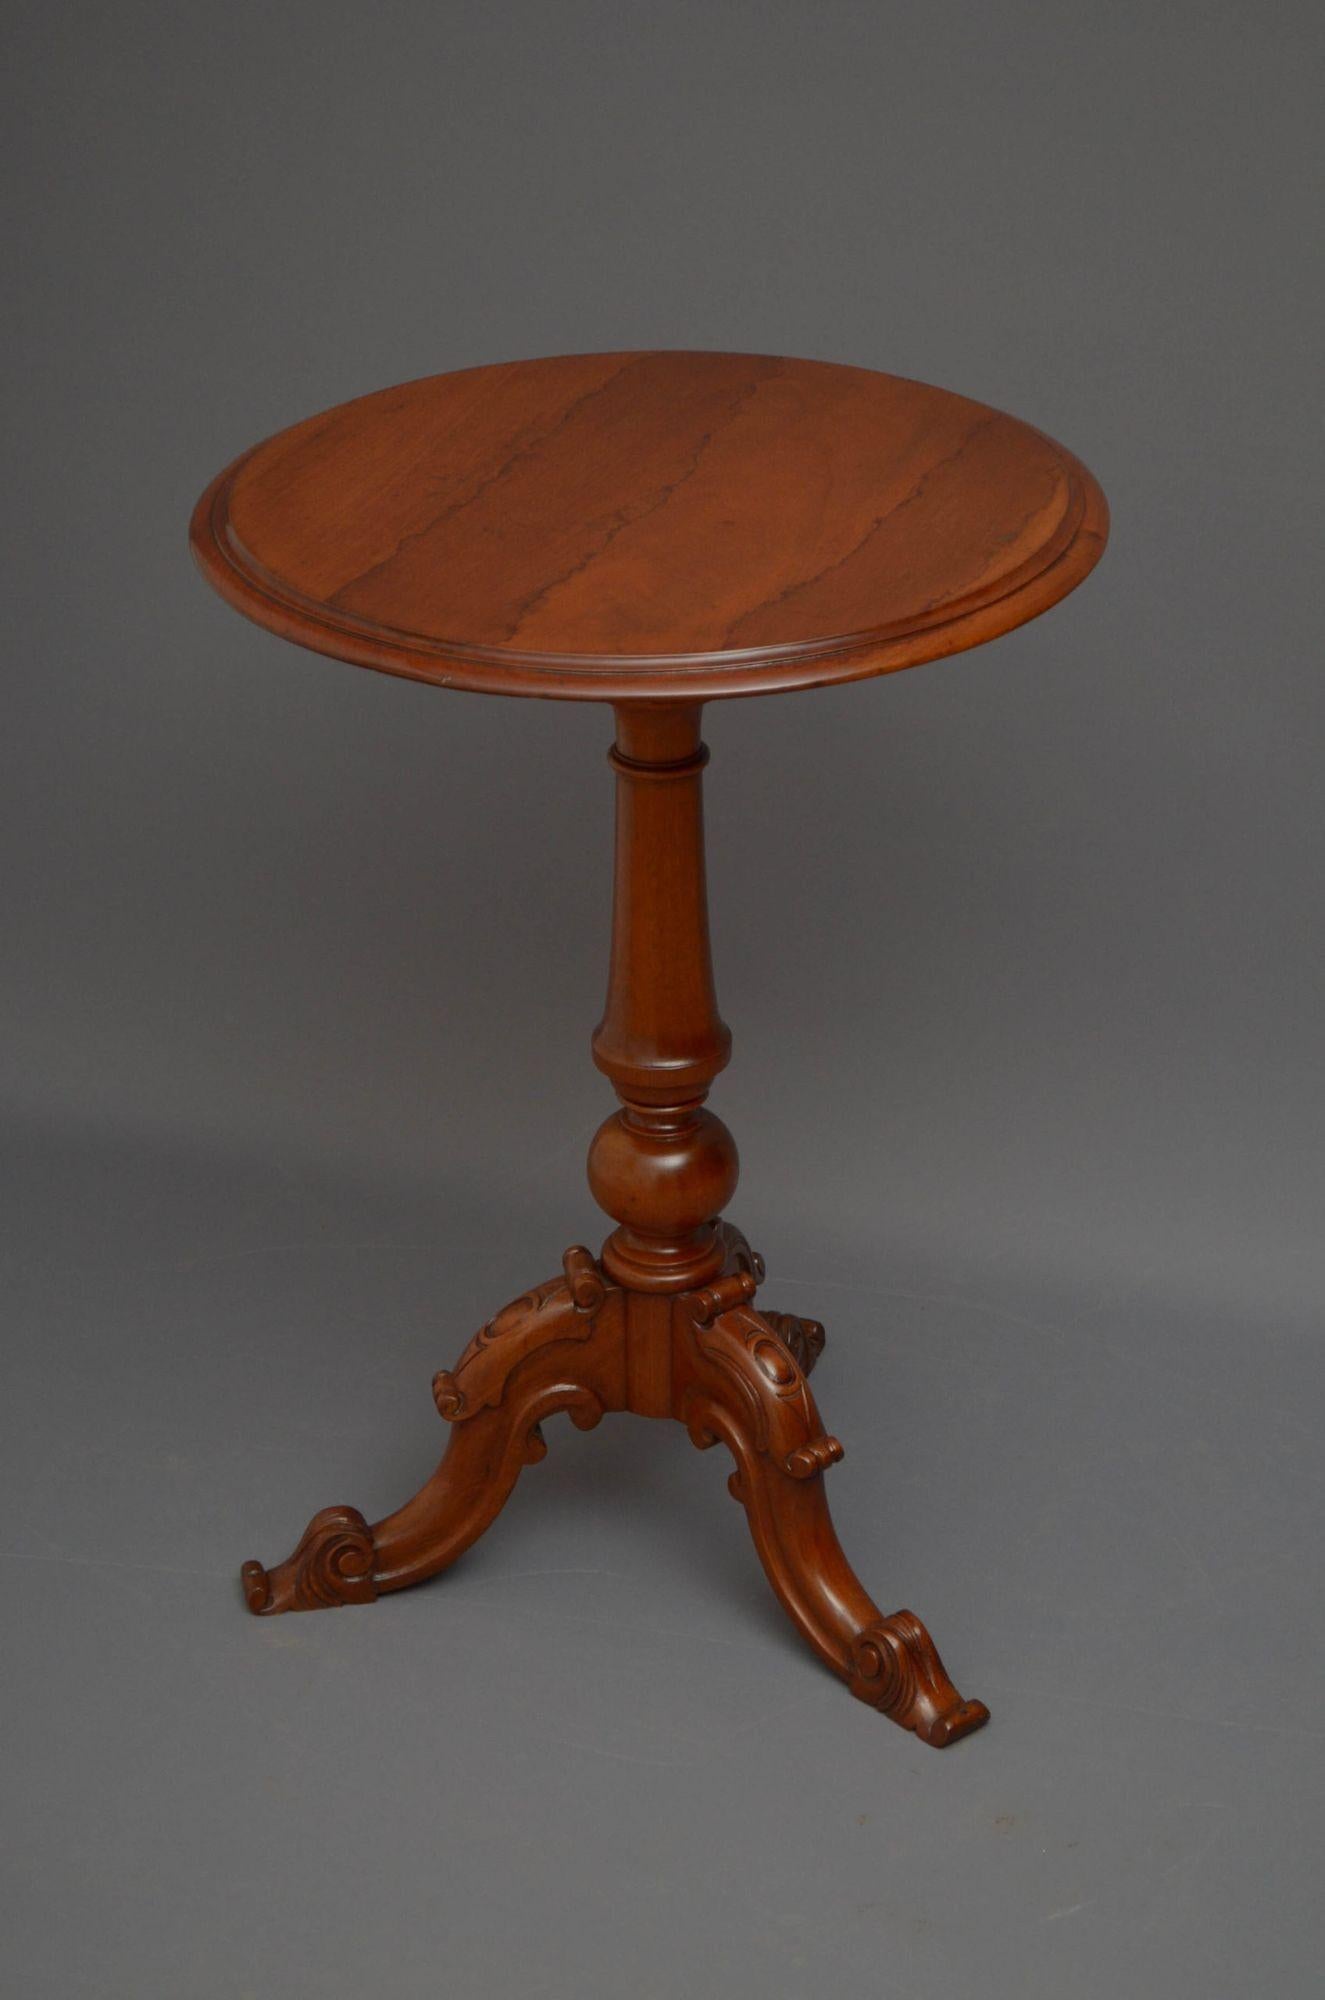 Sn5038, Victorian table in mahogany with figured mahogany top with moulded edge, standing on turned and carved column terminating in three carved cabriole legs. This antique table is in home ready condition, c1870

Measures: Height 27.5